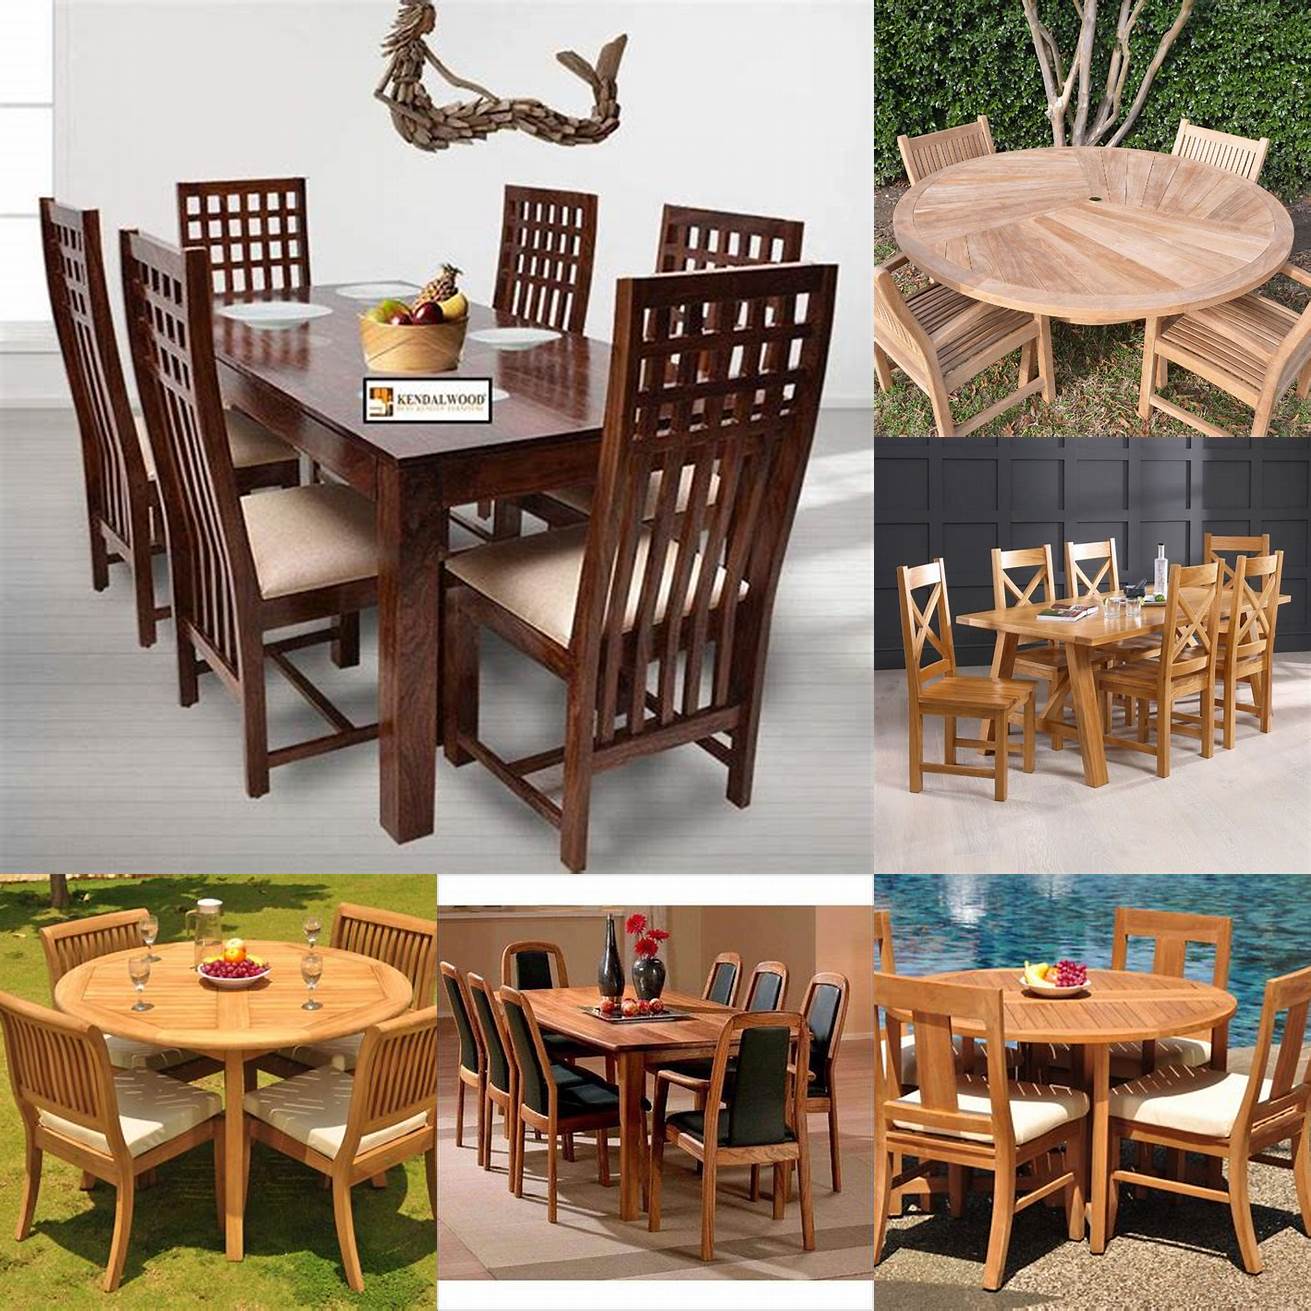 Teak Wood Dining Table with a Variety of Chairs